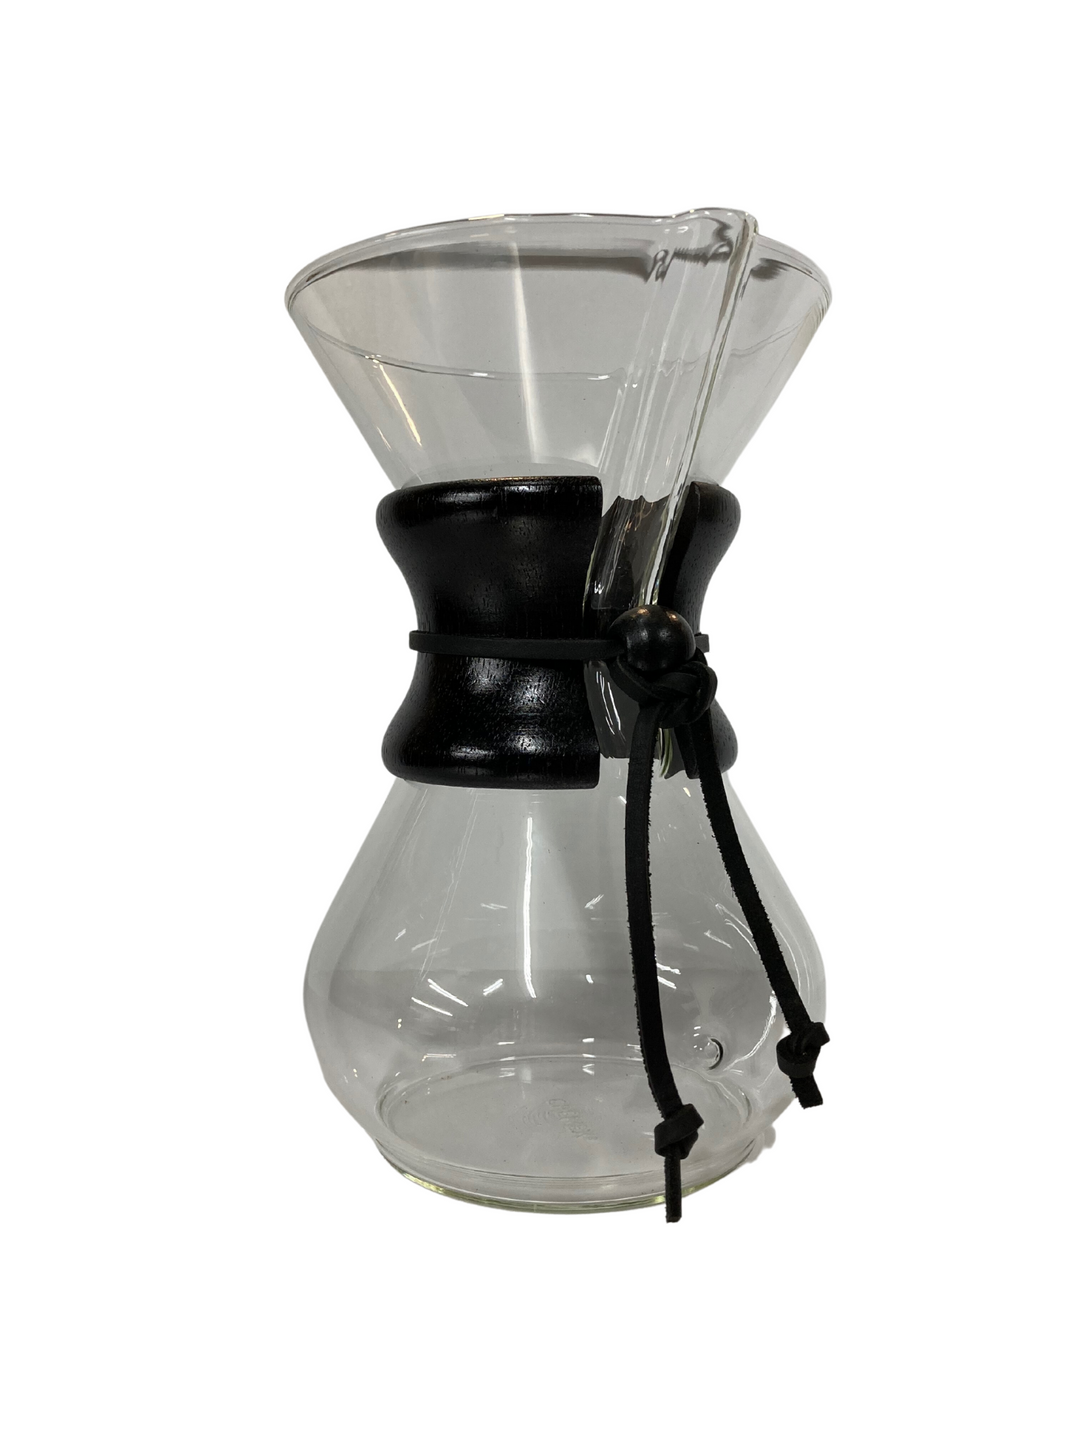 Limited Edition Bodum Pour Over Coffee Maker | Black - Main Street Roasters